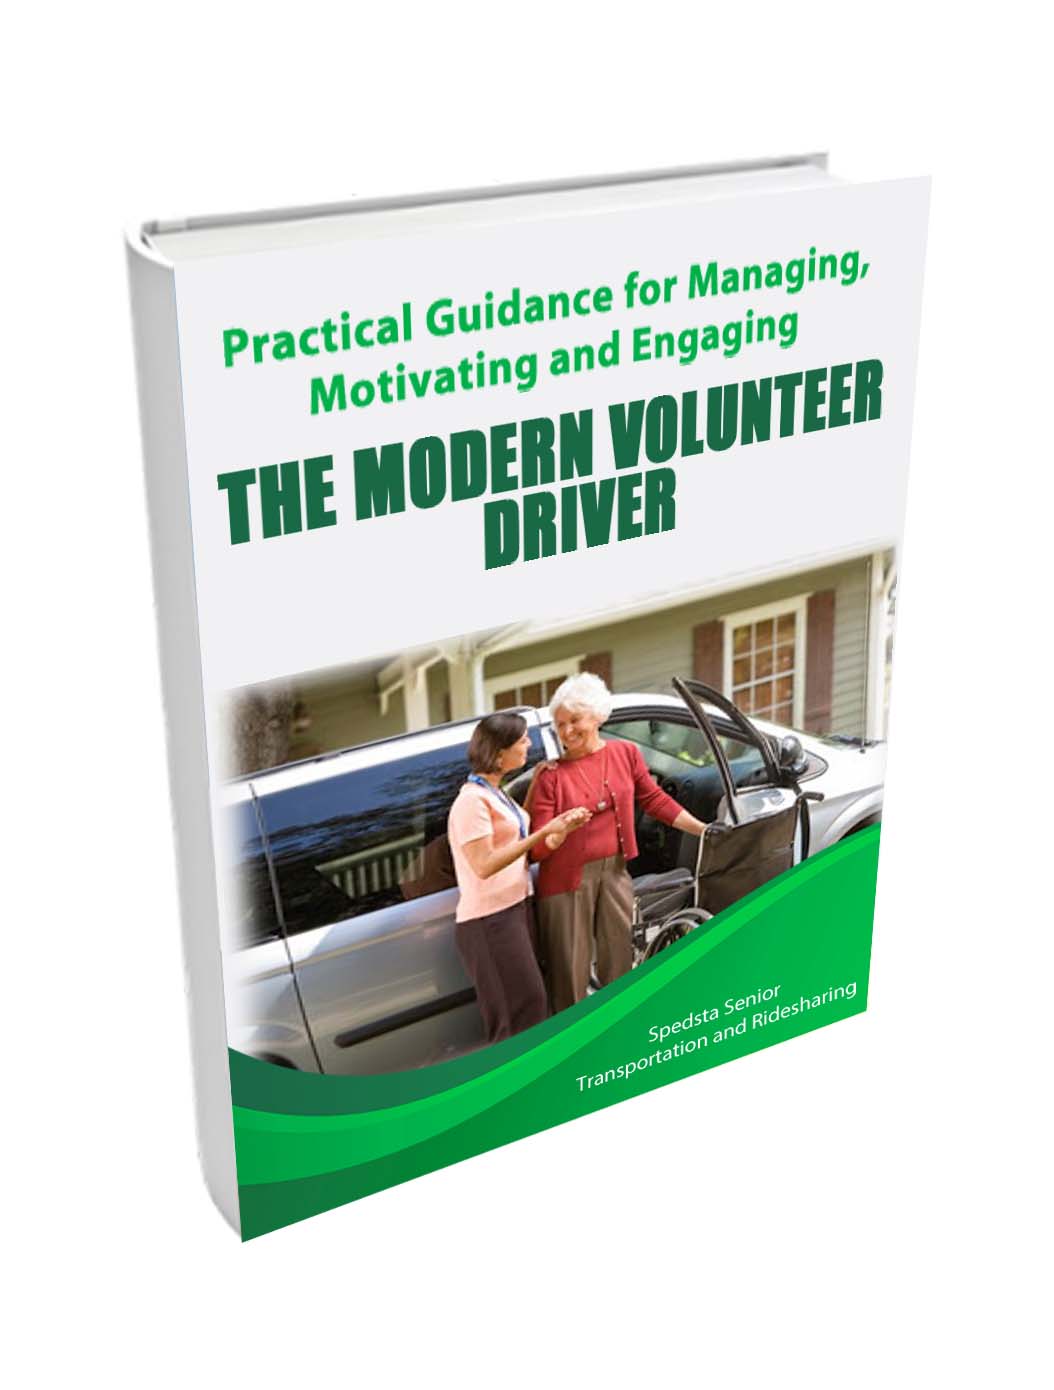 Practical Guidance for Managing, Motivating and Engaging the Modern Volunteer Driver